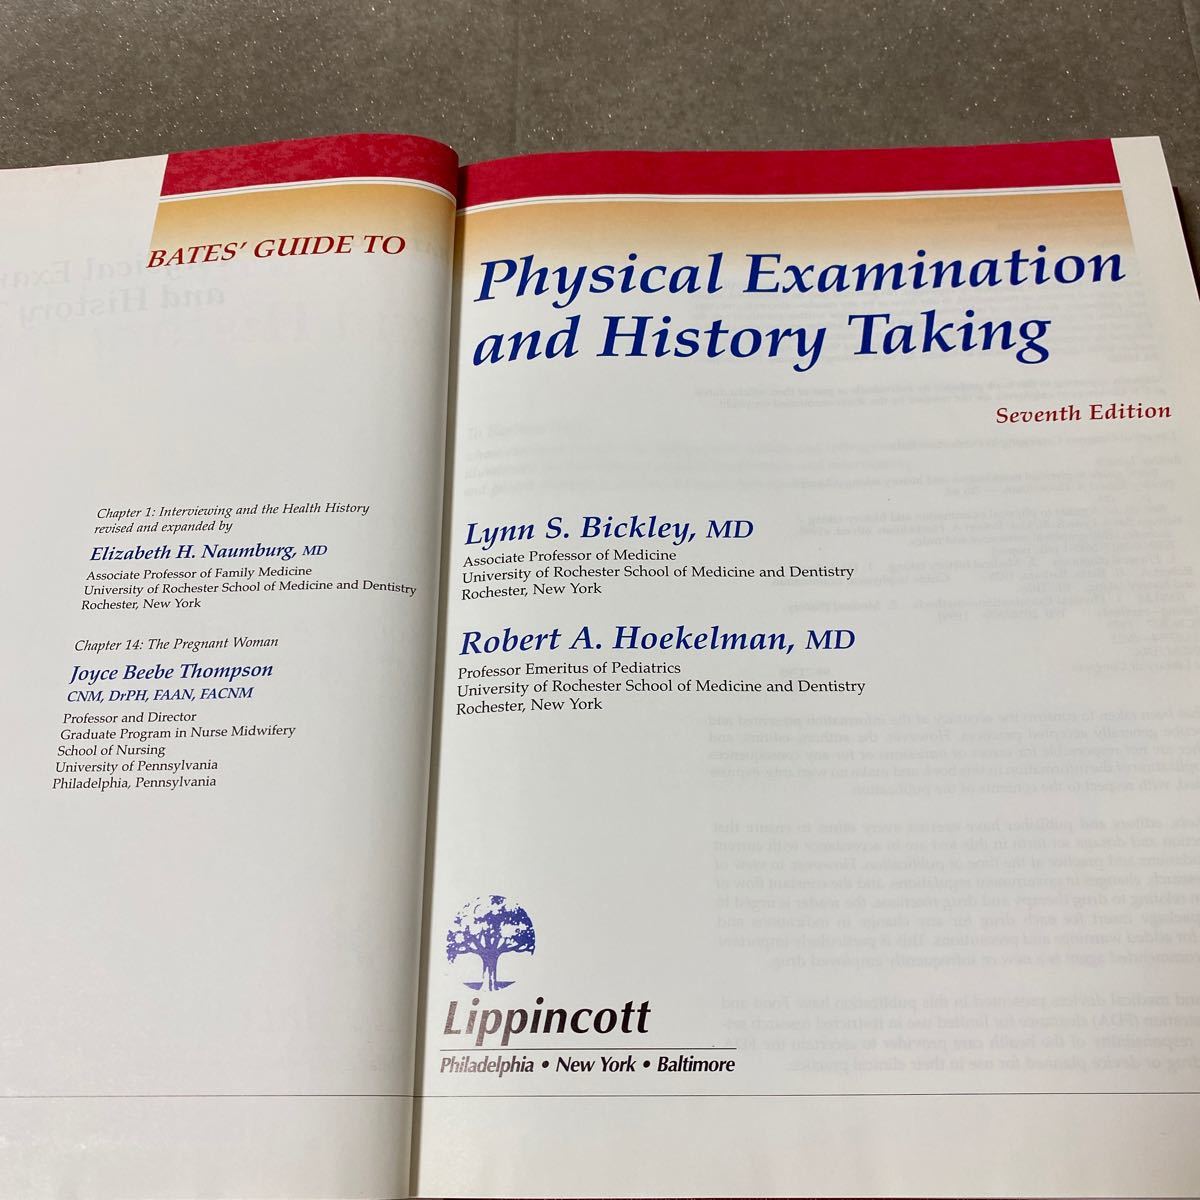 40 BATES' GUIDE TO Physical Examination and History Taking SEVENTH EDITION LYNN S. BICKLEY lippincott_画像5